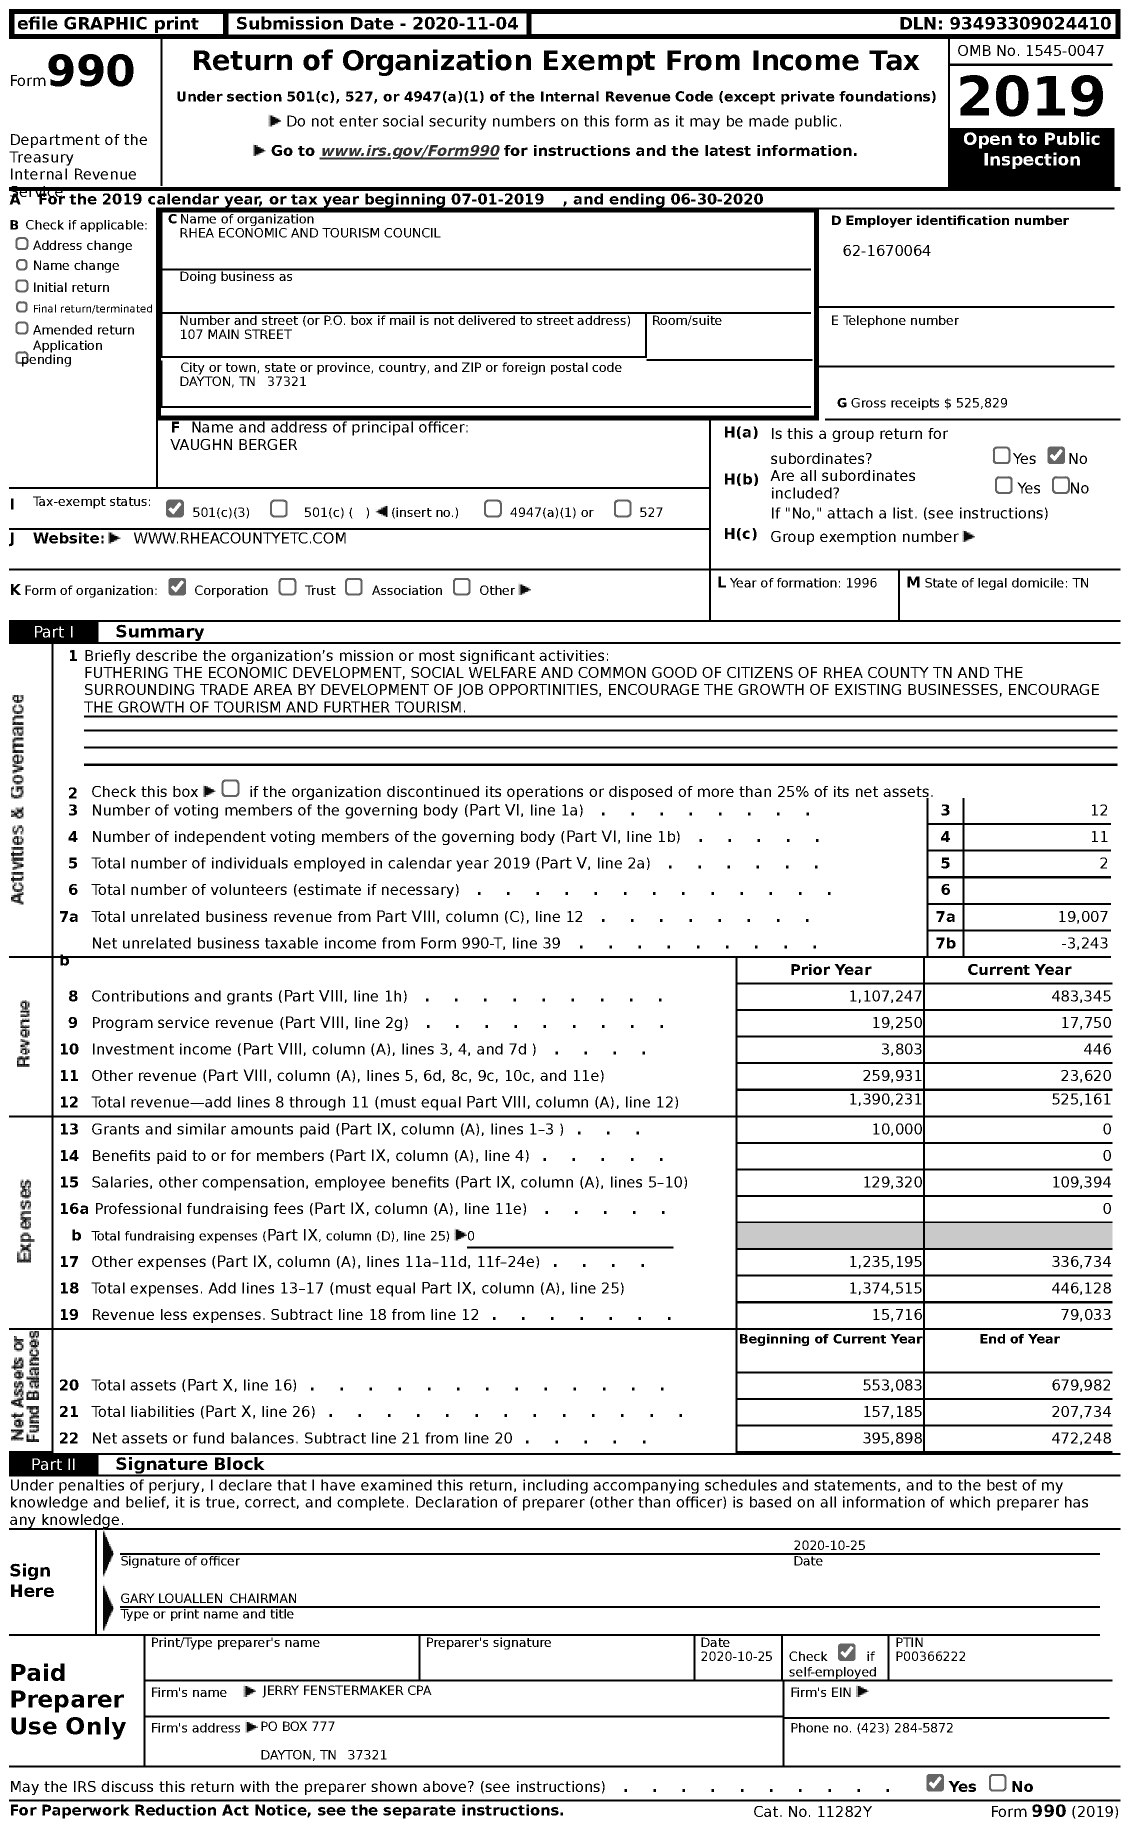 Image of first page of 2019 Form 990 for Rhea Economic and Tourism Council